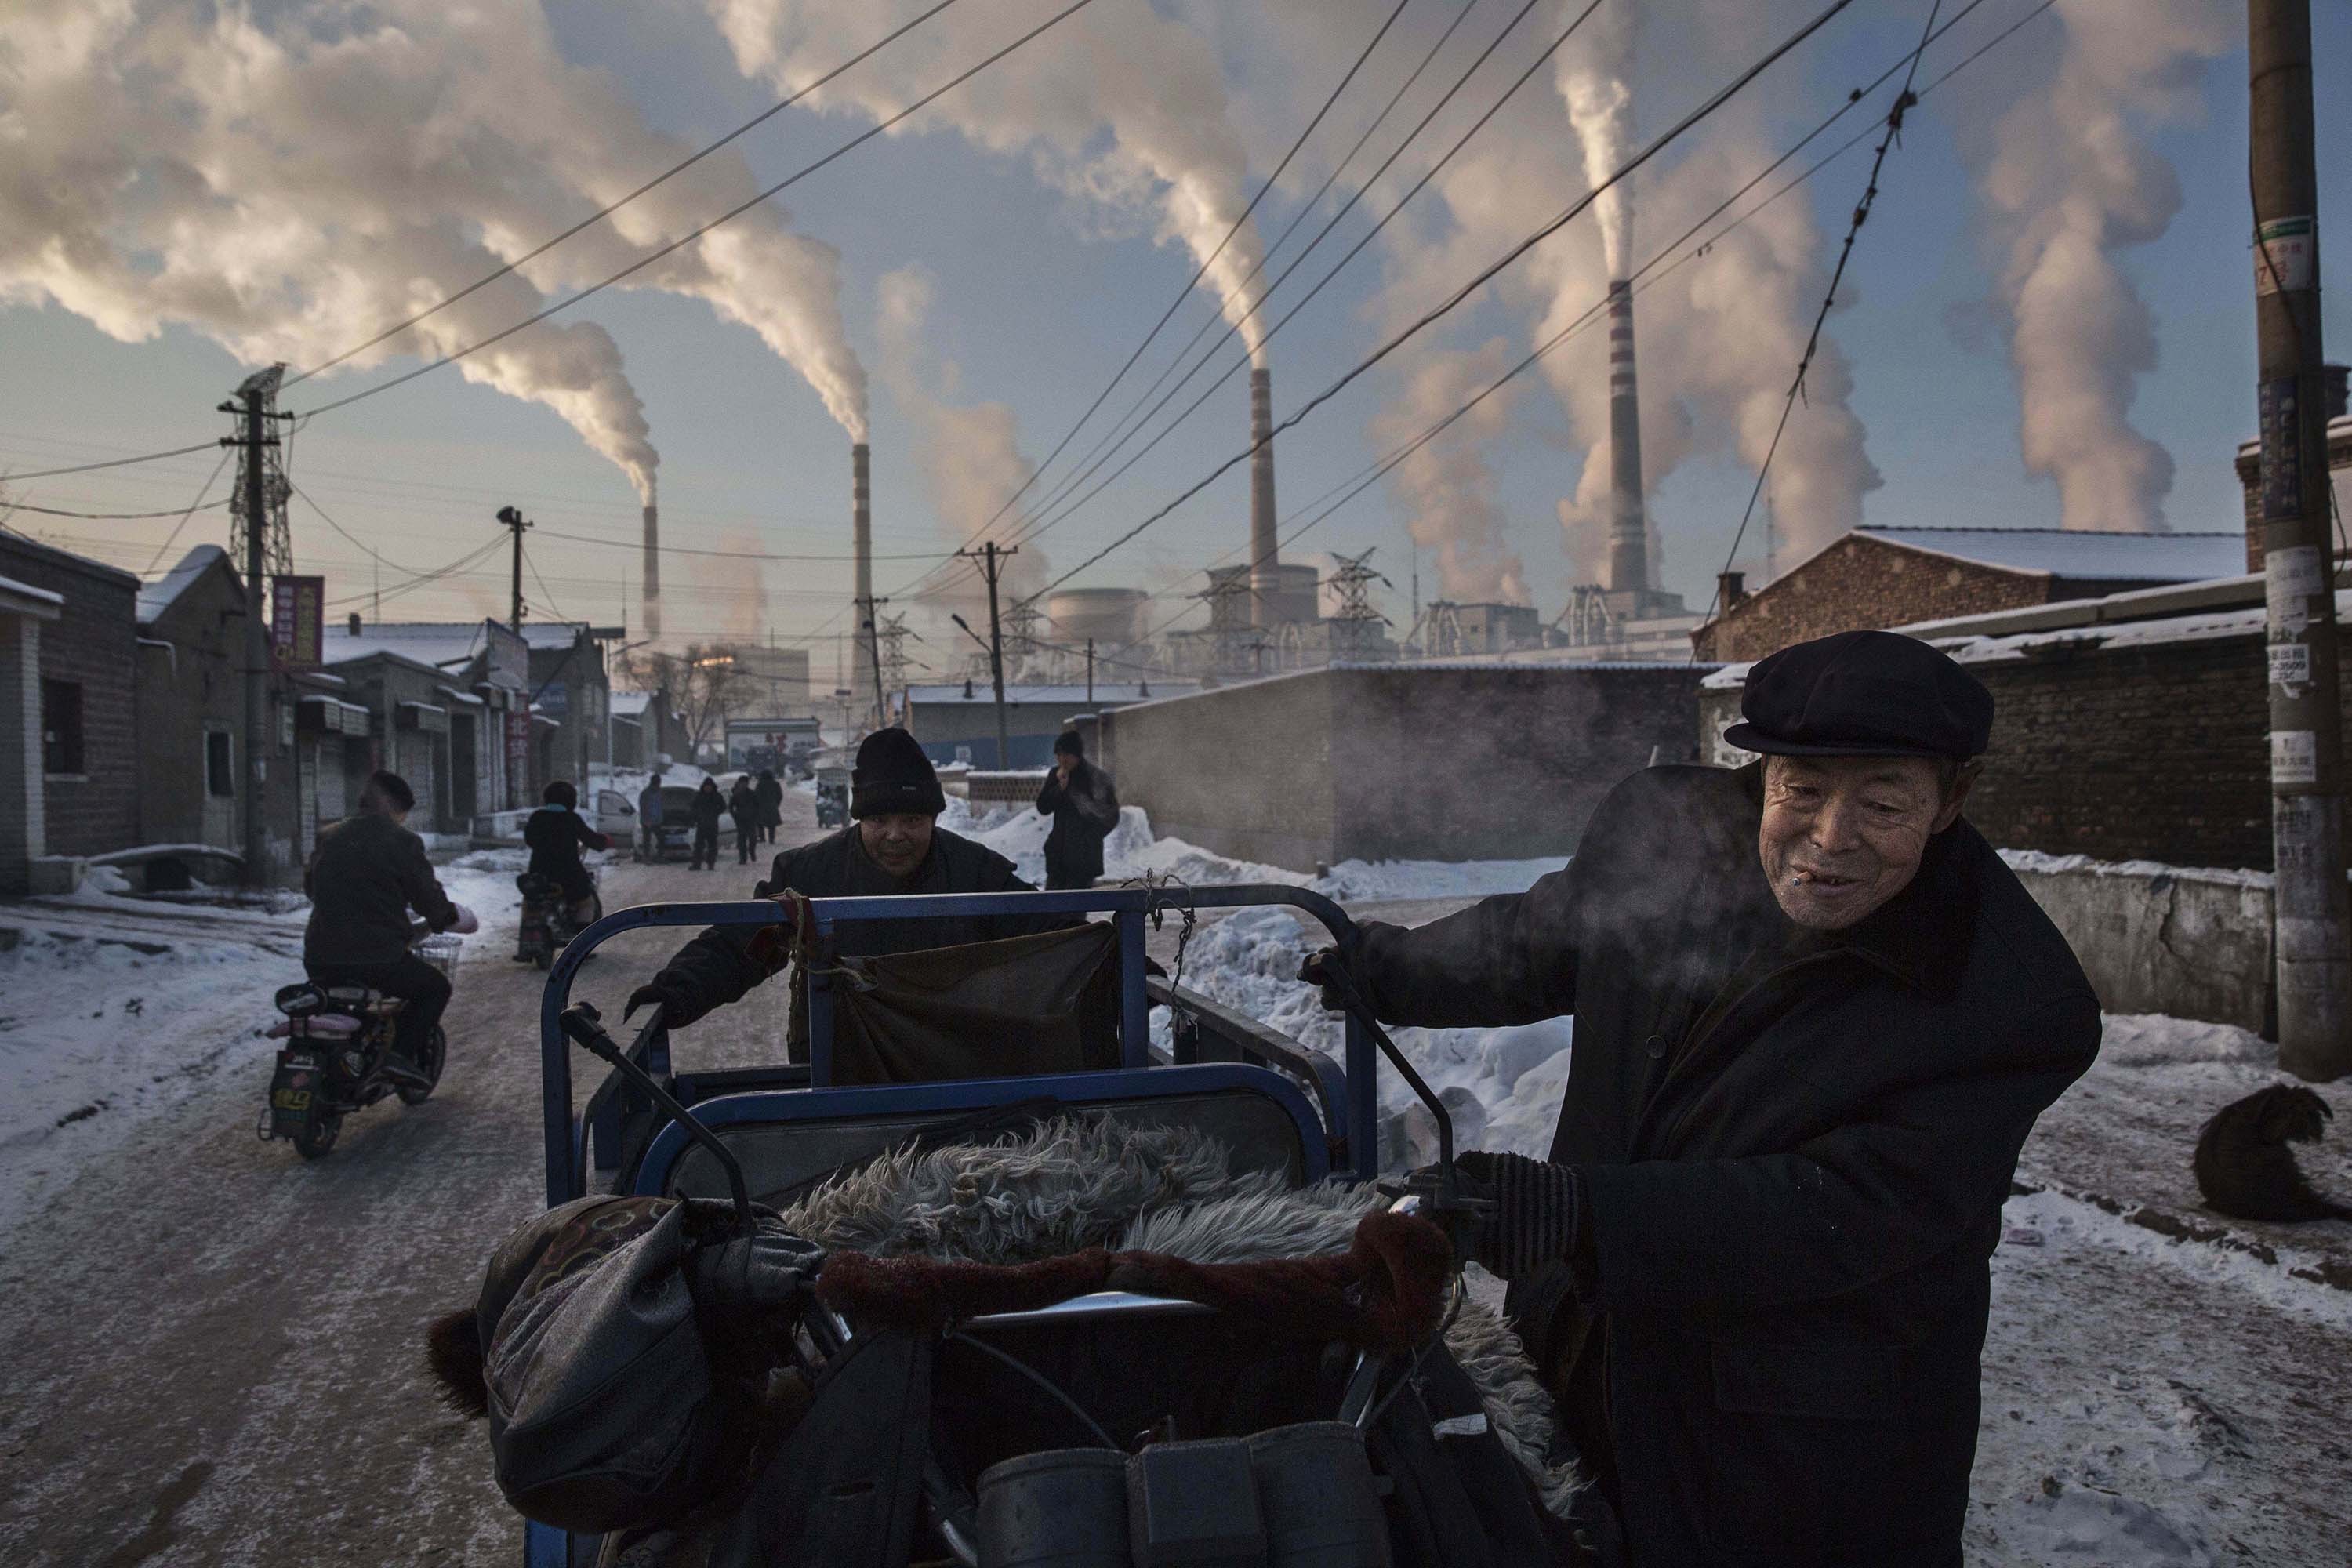 China funds over a quarter of coal power plants with generating capacity of 399 gigawatts under development outside the nation. Here, Chinese men pull a cart in a neighbourhood next to a coal-fired power plant in Shanxi, China, on November 26, 2015. Photo: Associated Press